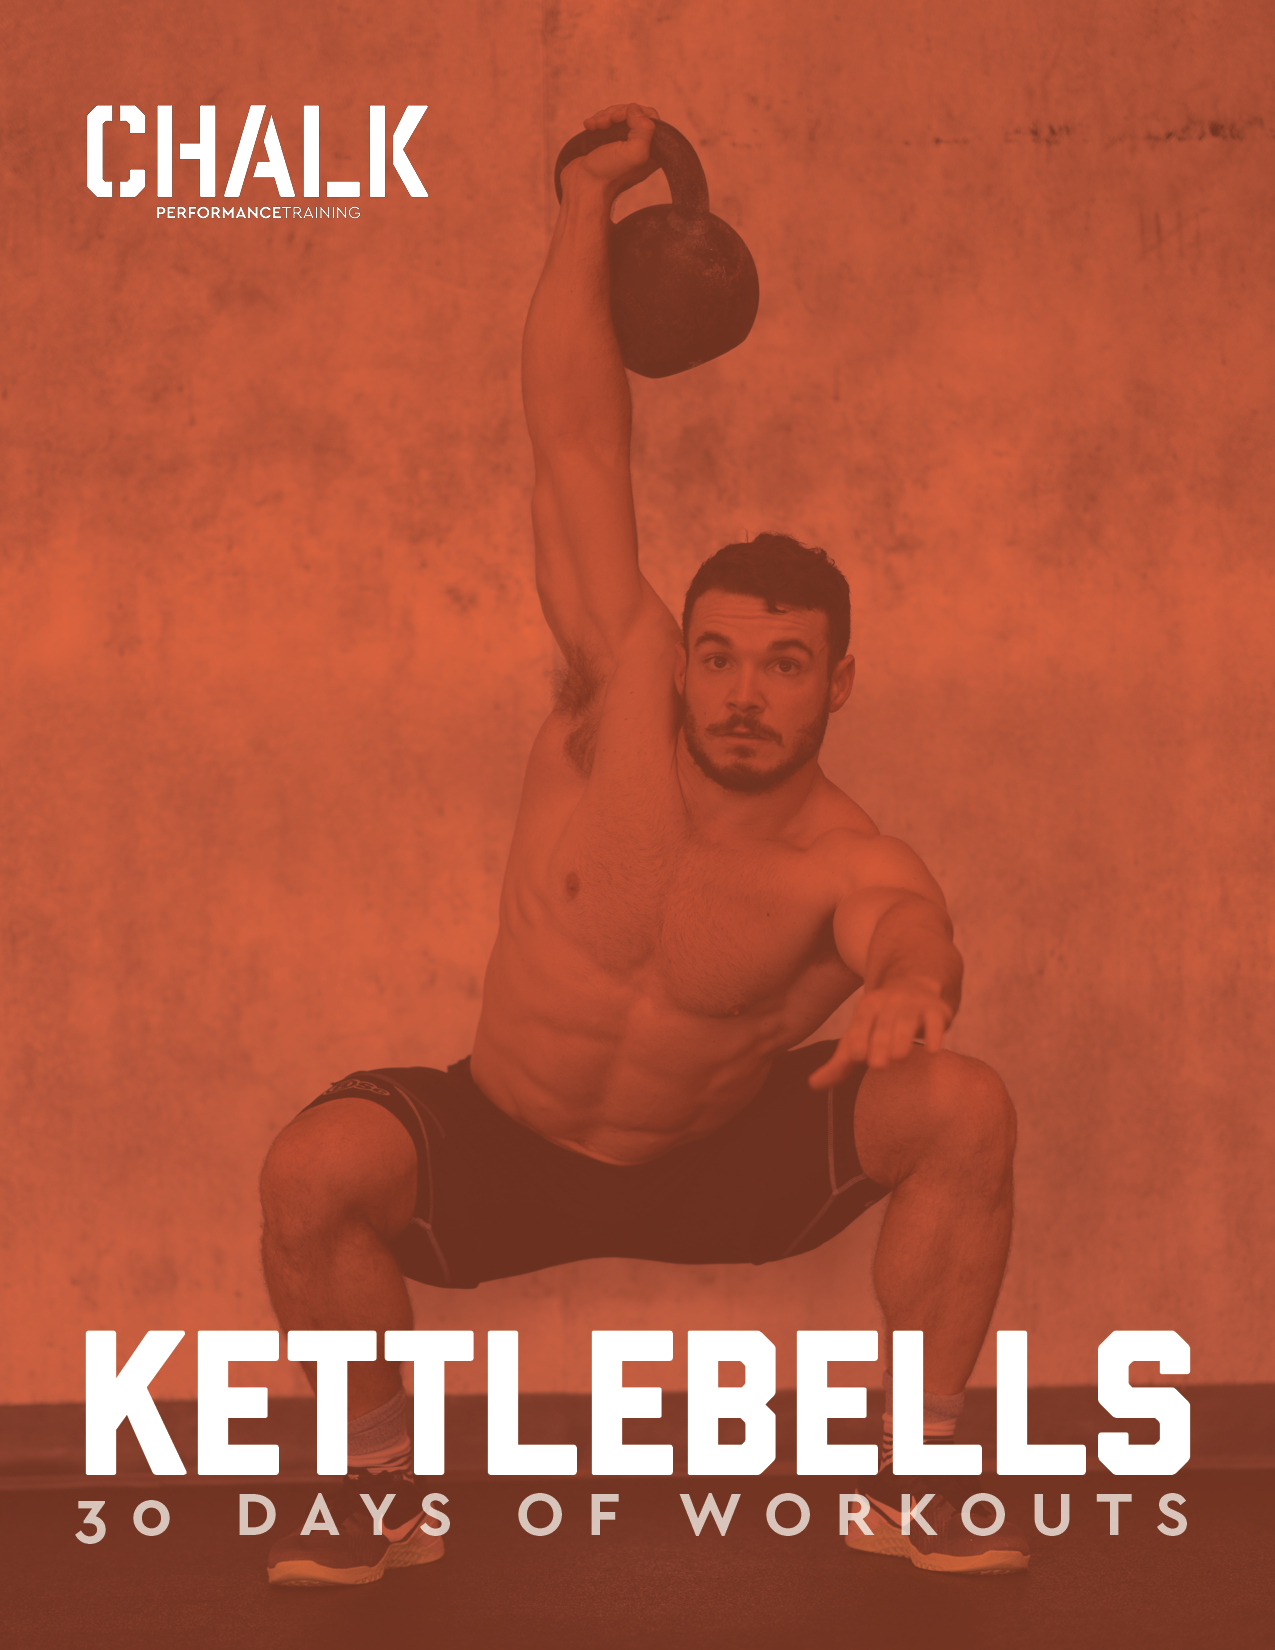 Kettlebells eBook - 30 Days of Workouts (includes videos!)